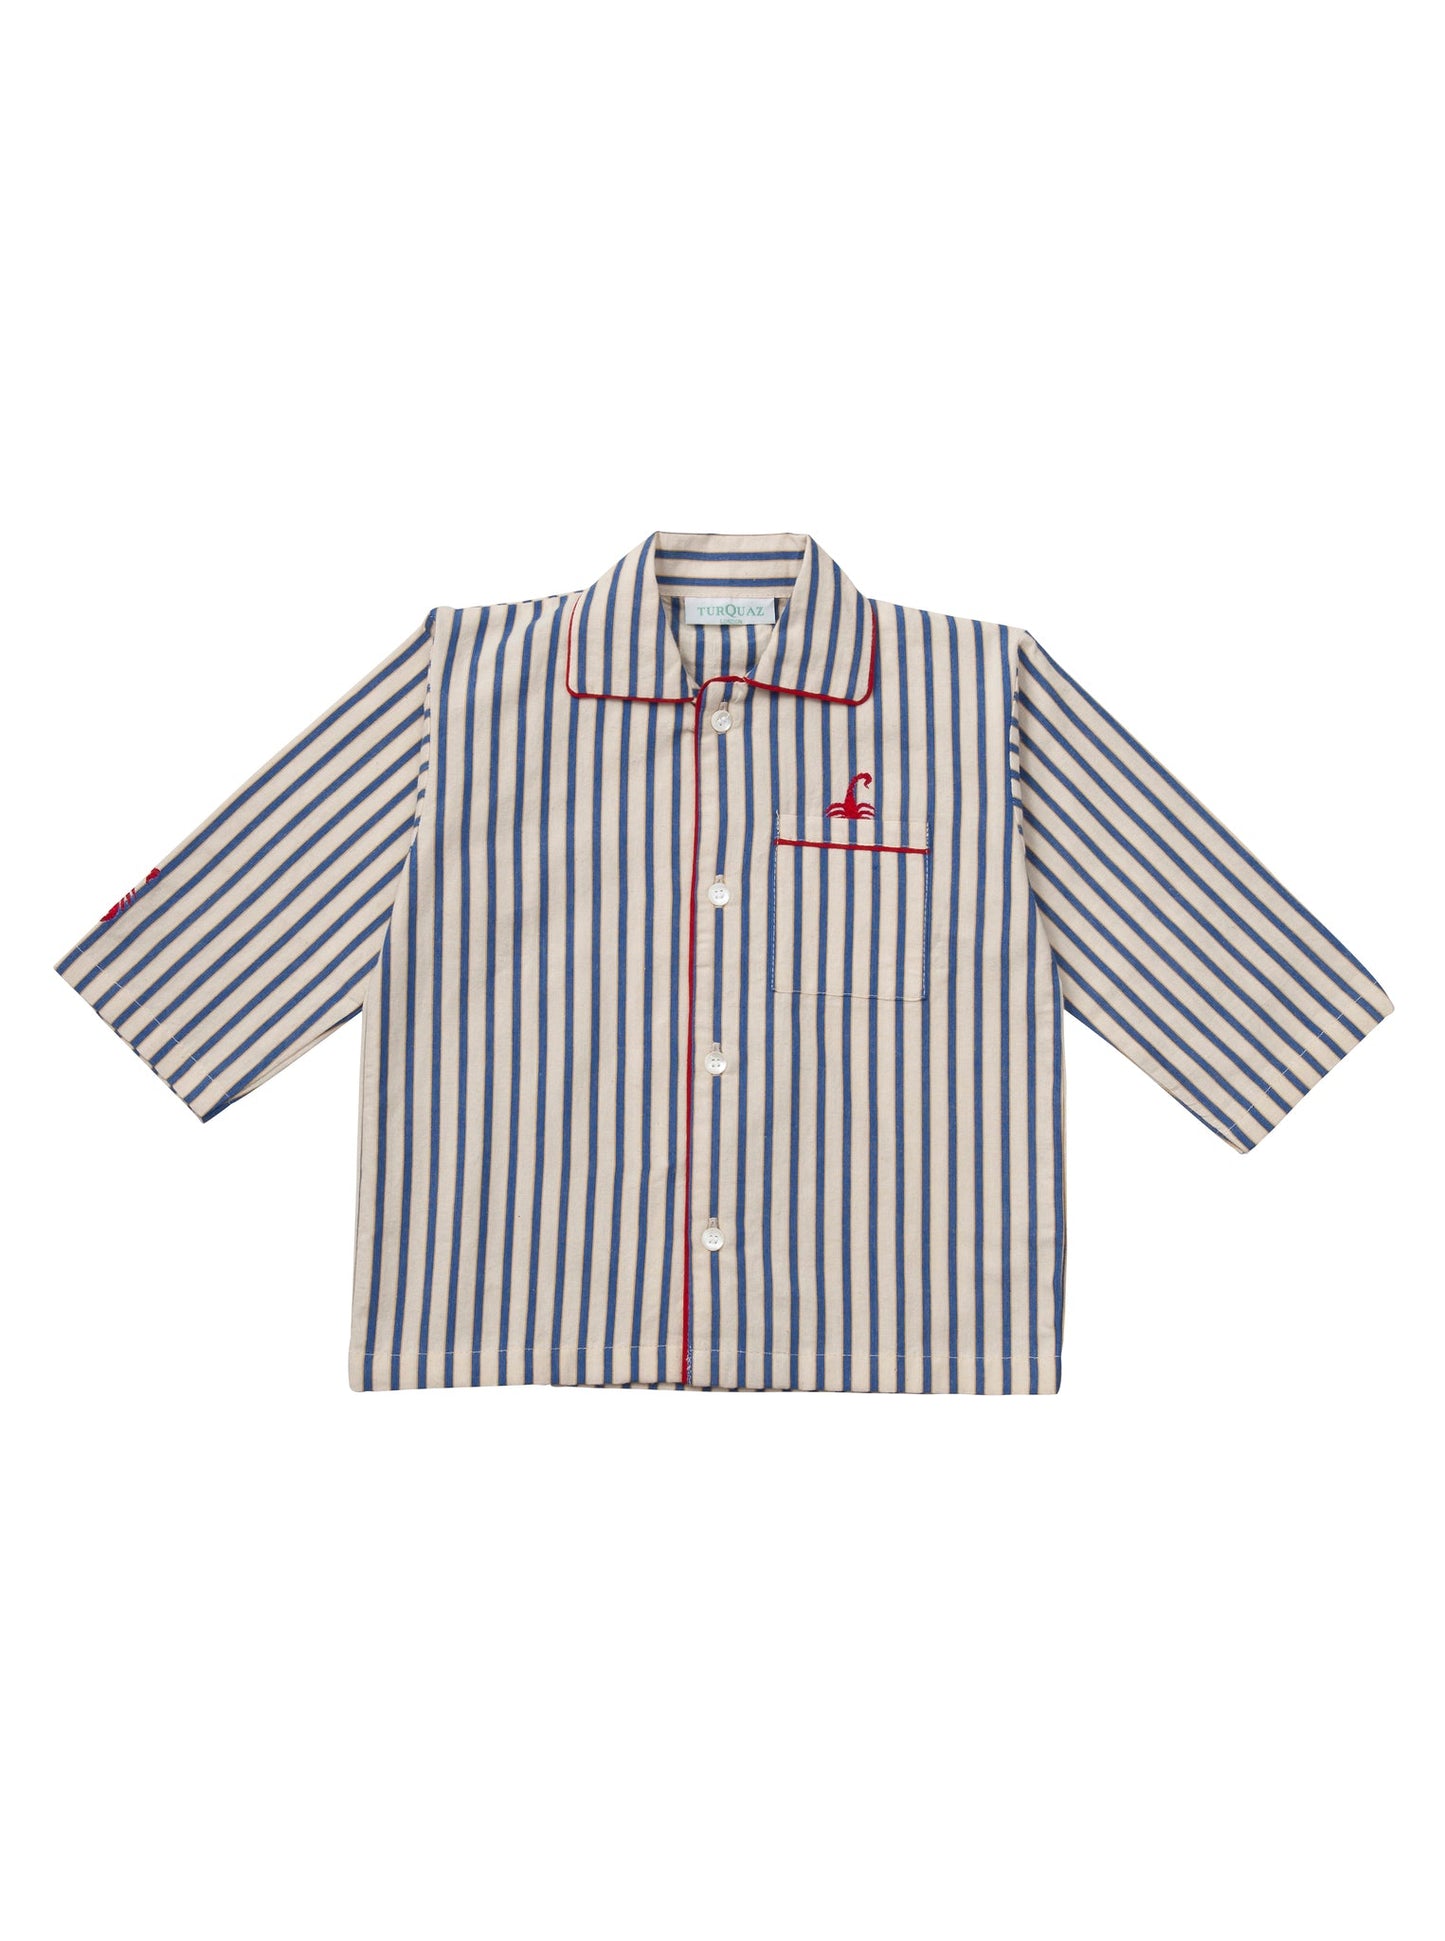 Front top. Traditional white and blue striped children's pyjamas made in soft brushed cotton with red piping and scorpion motifs. 